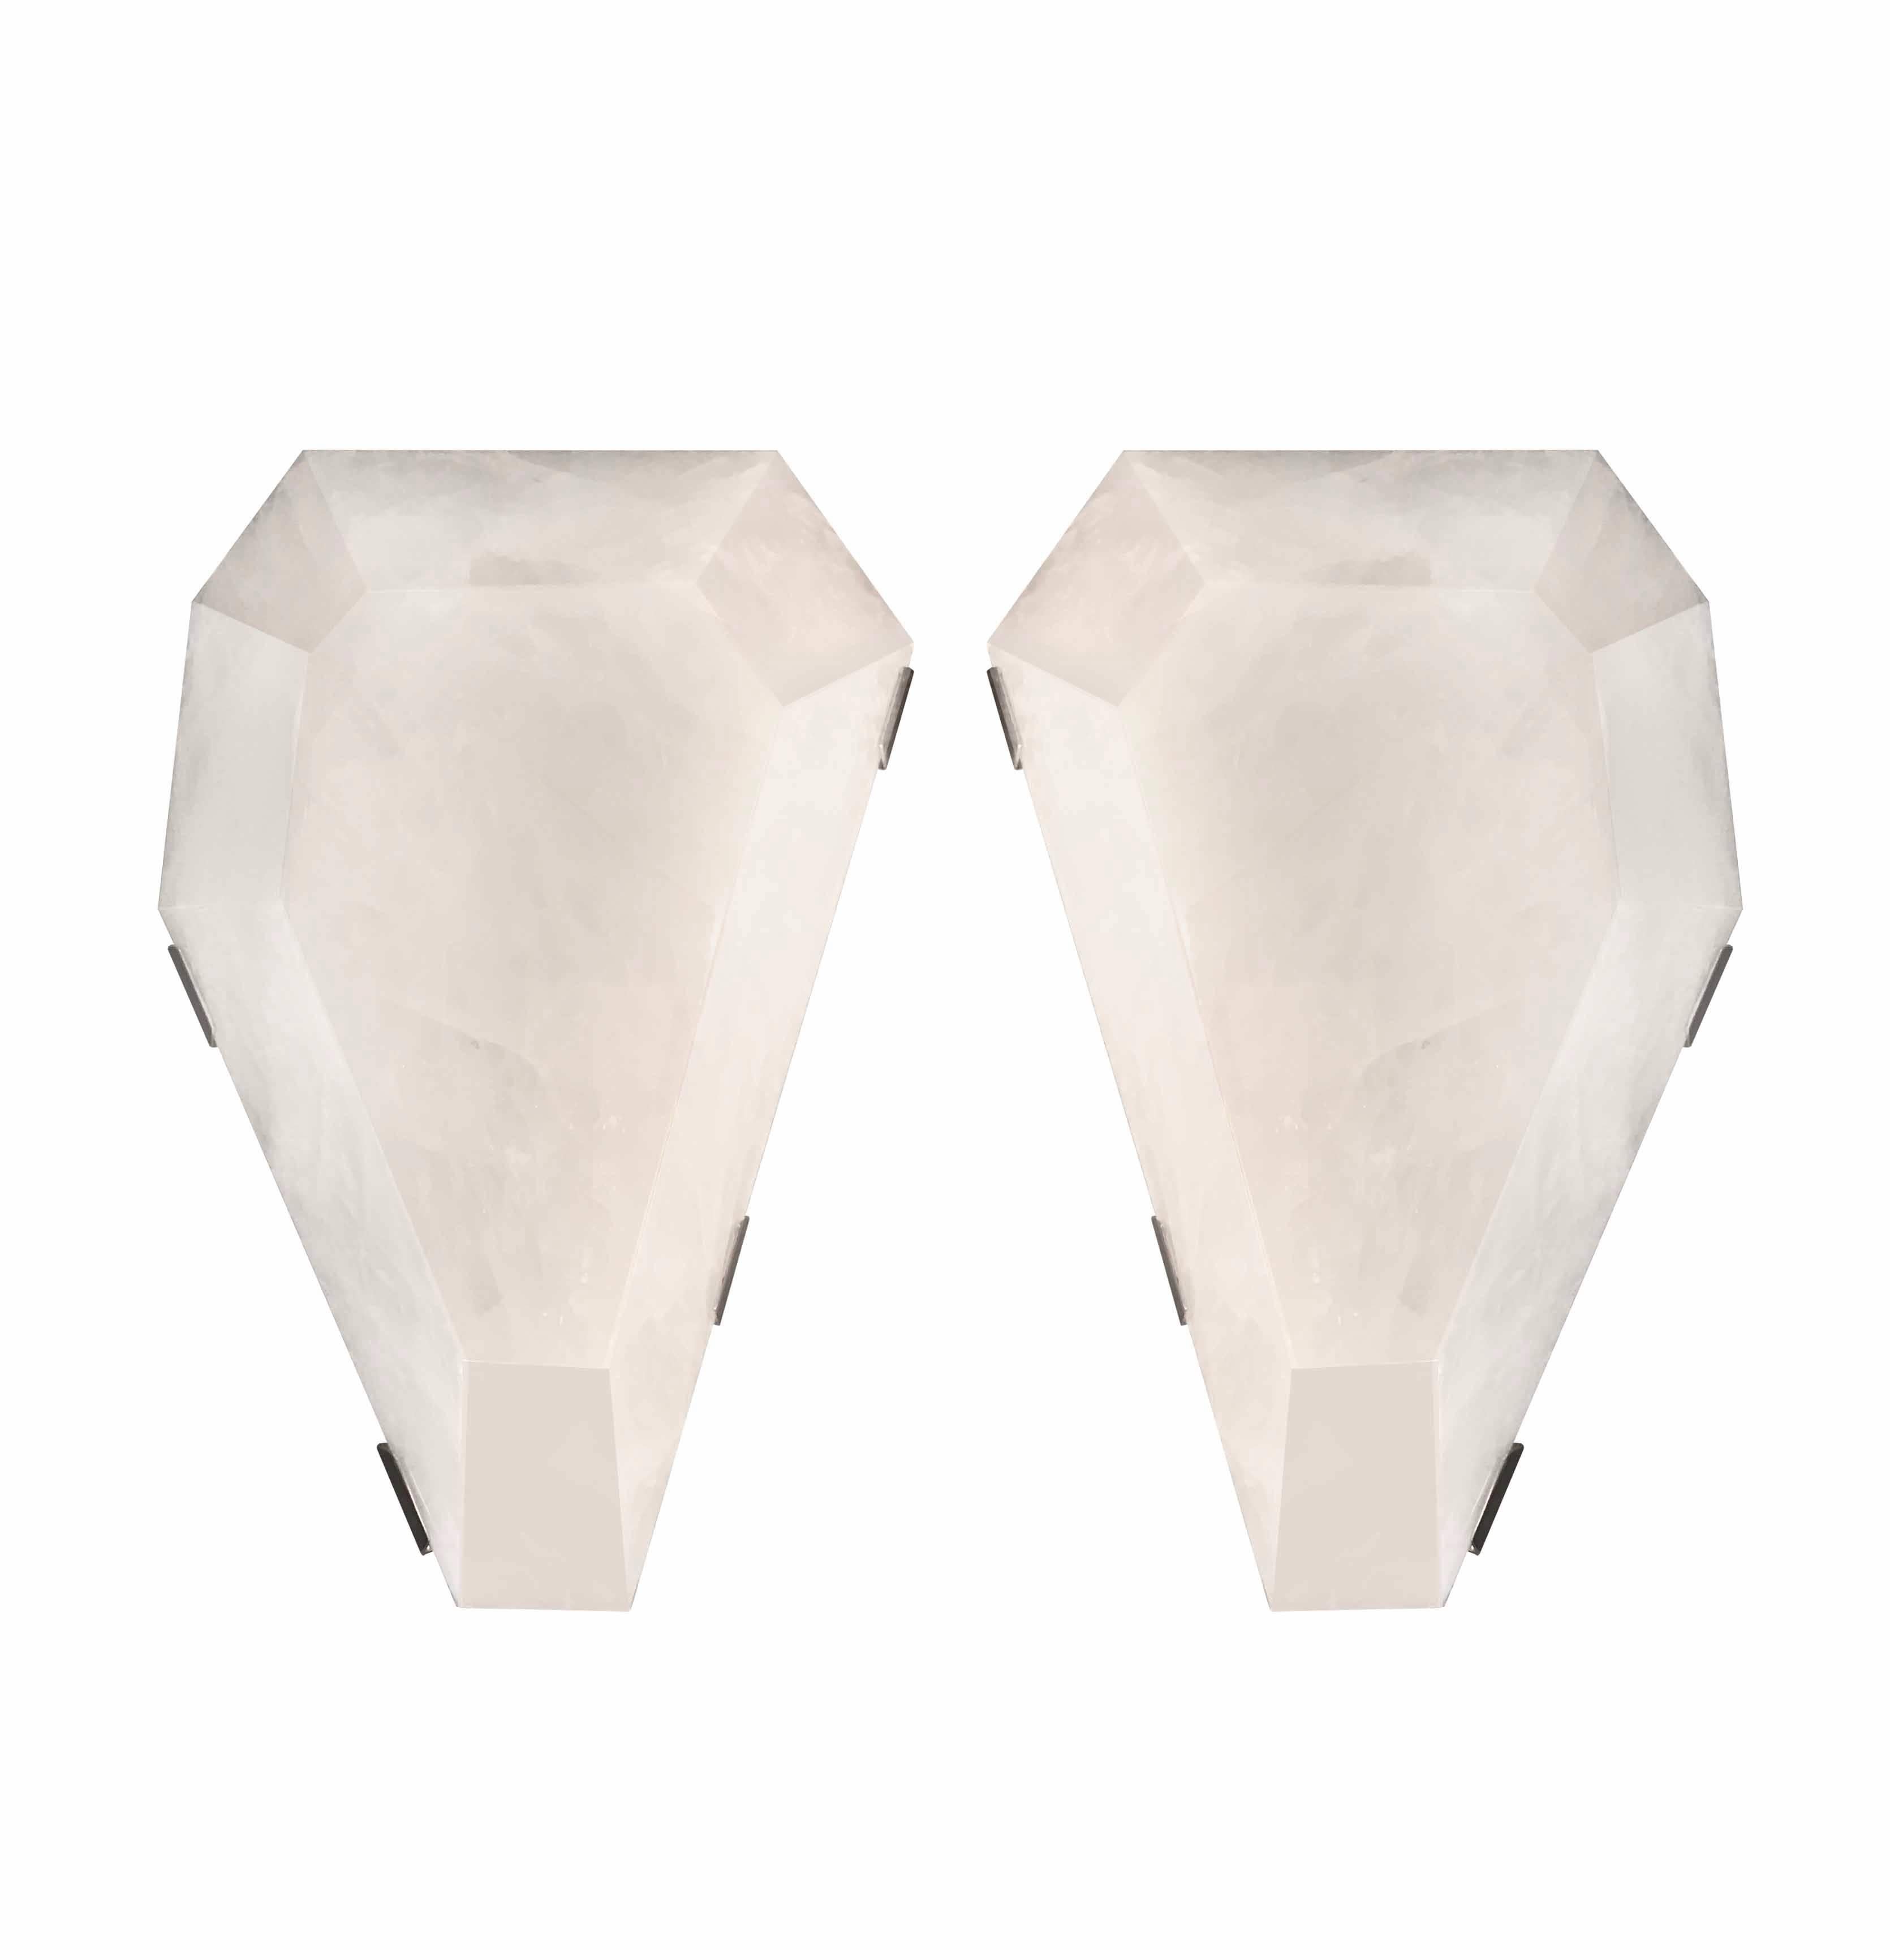 Pair of Carved Diamond Form Rock Crystal Sconces